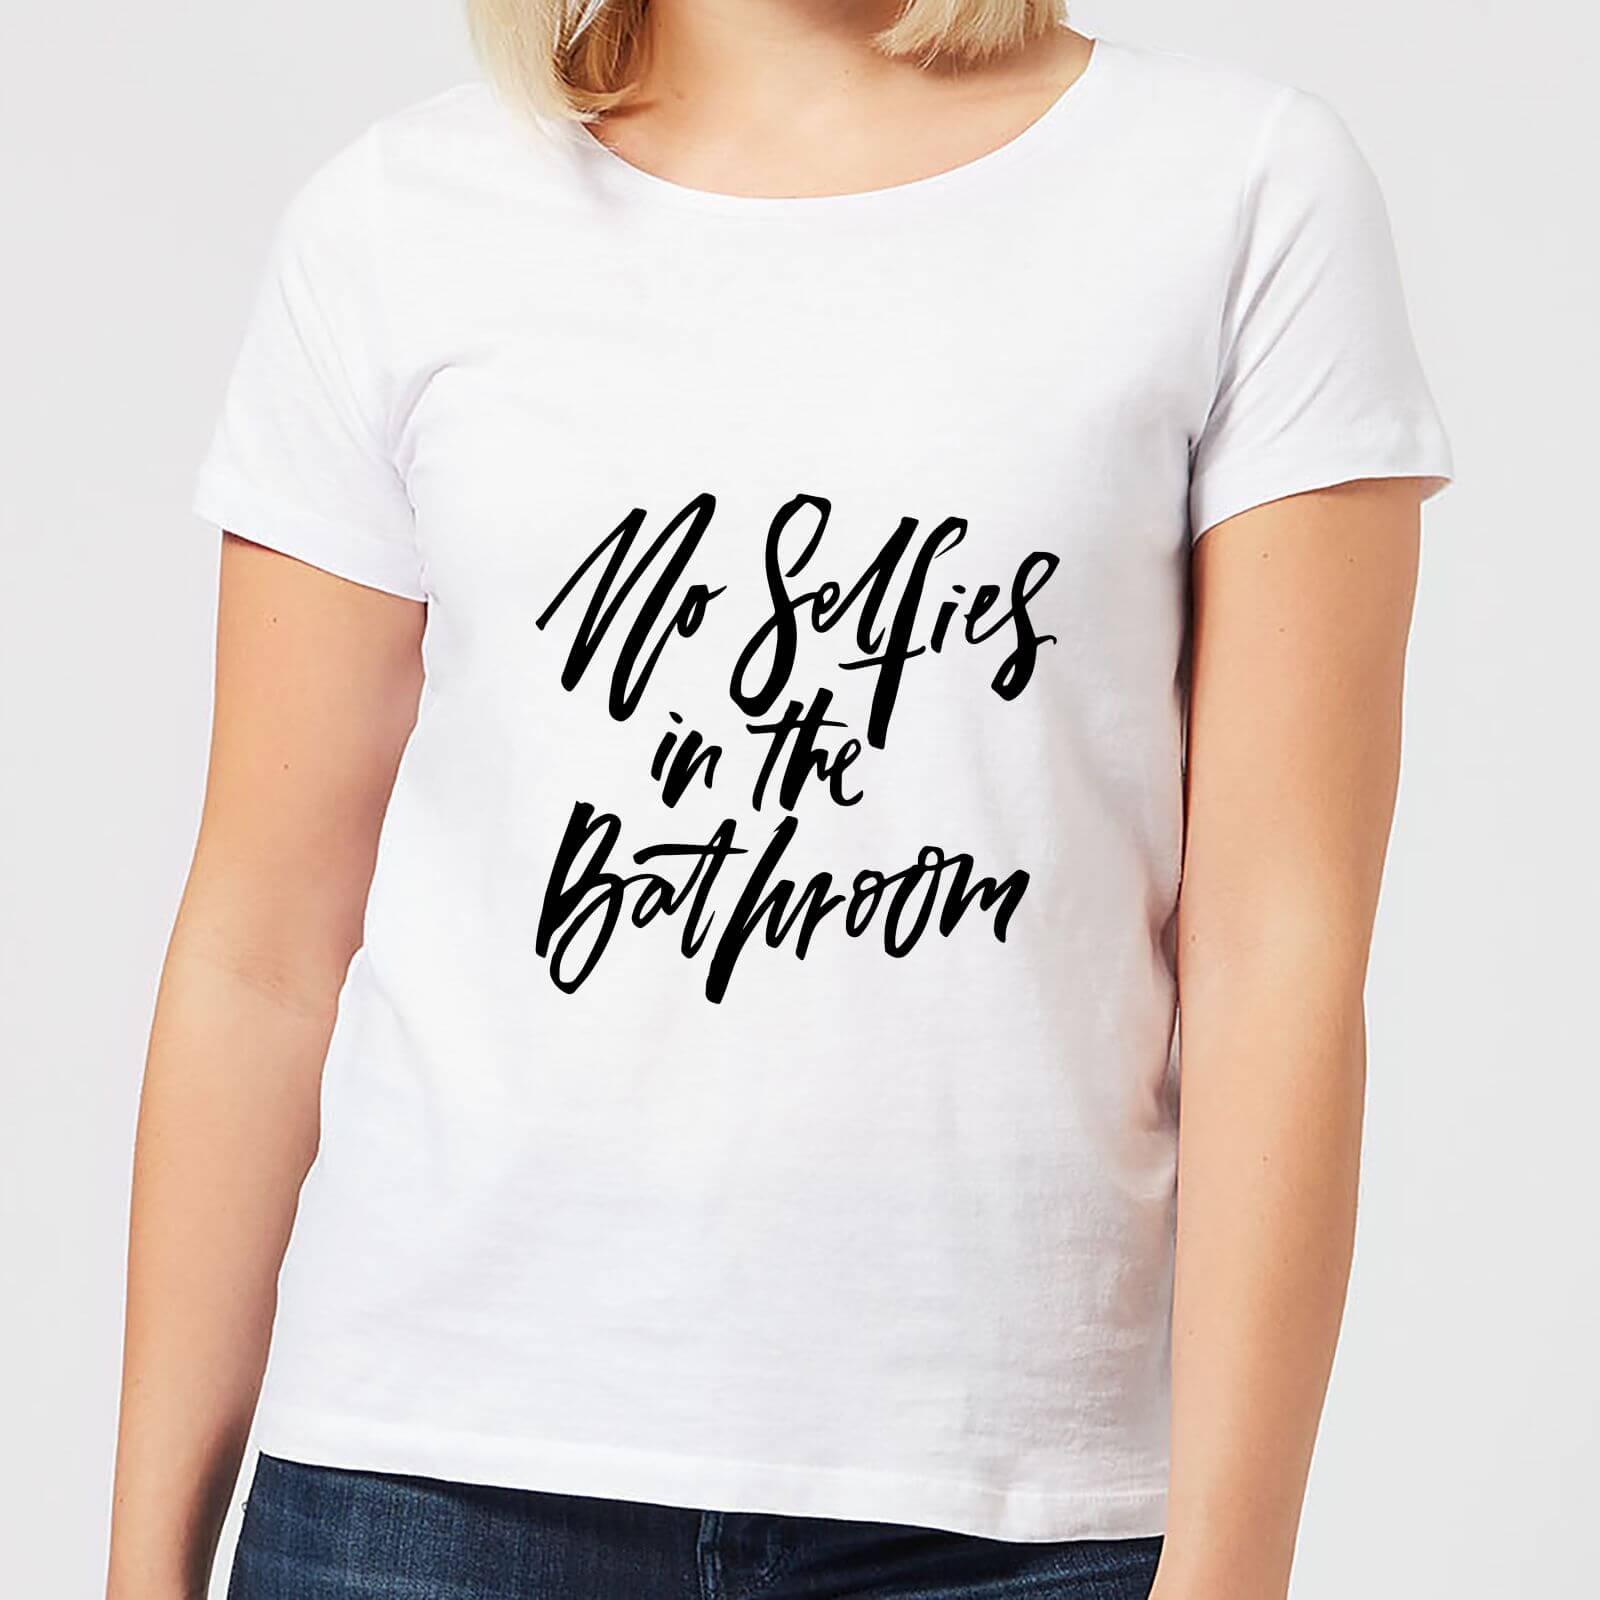 No Selfies In The Bathroom Women's T-Shirt - White - S - White